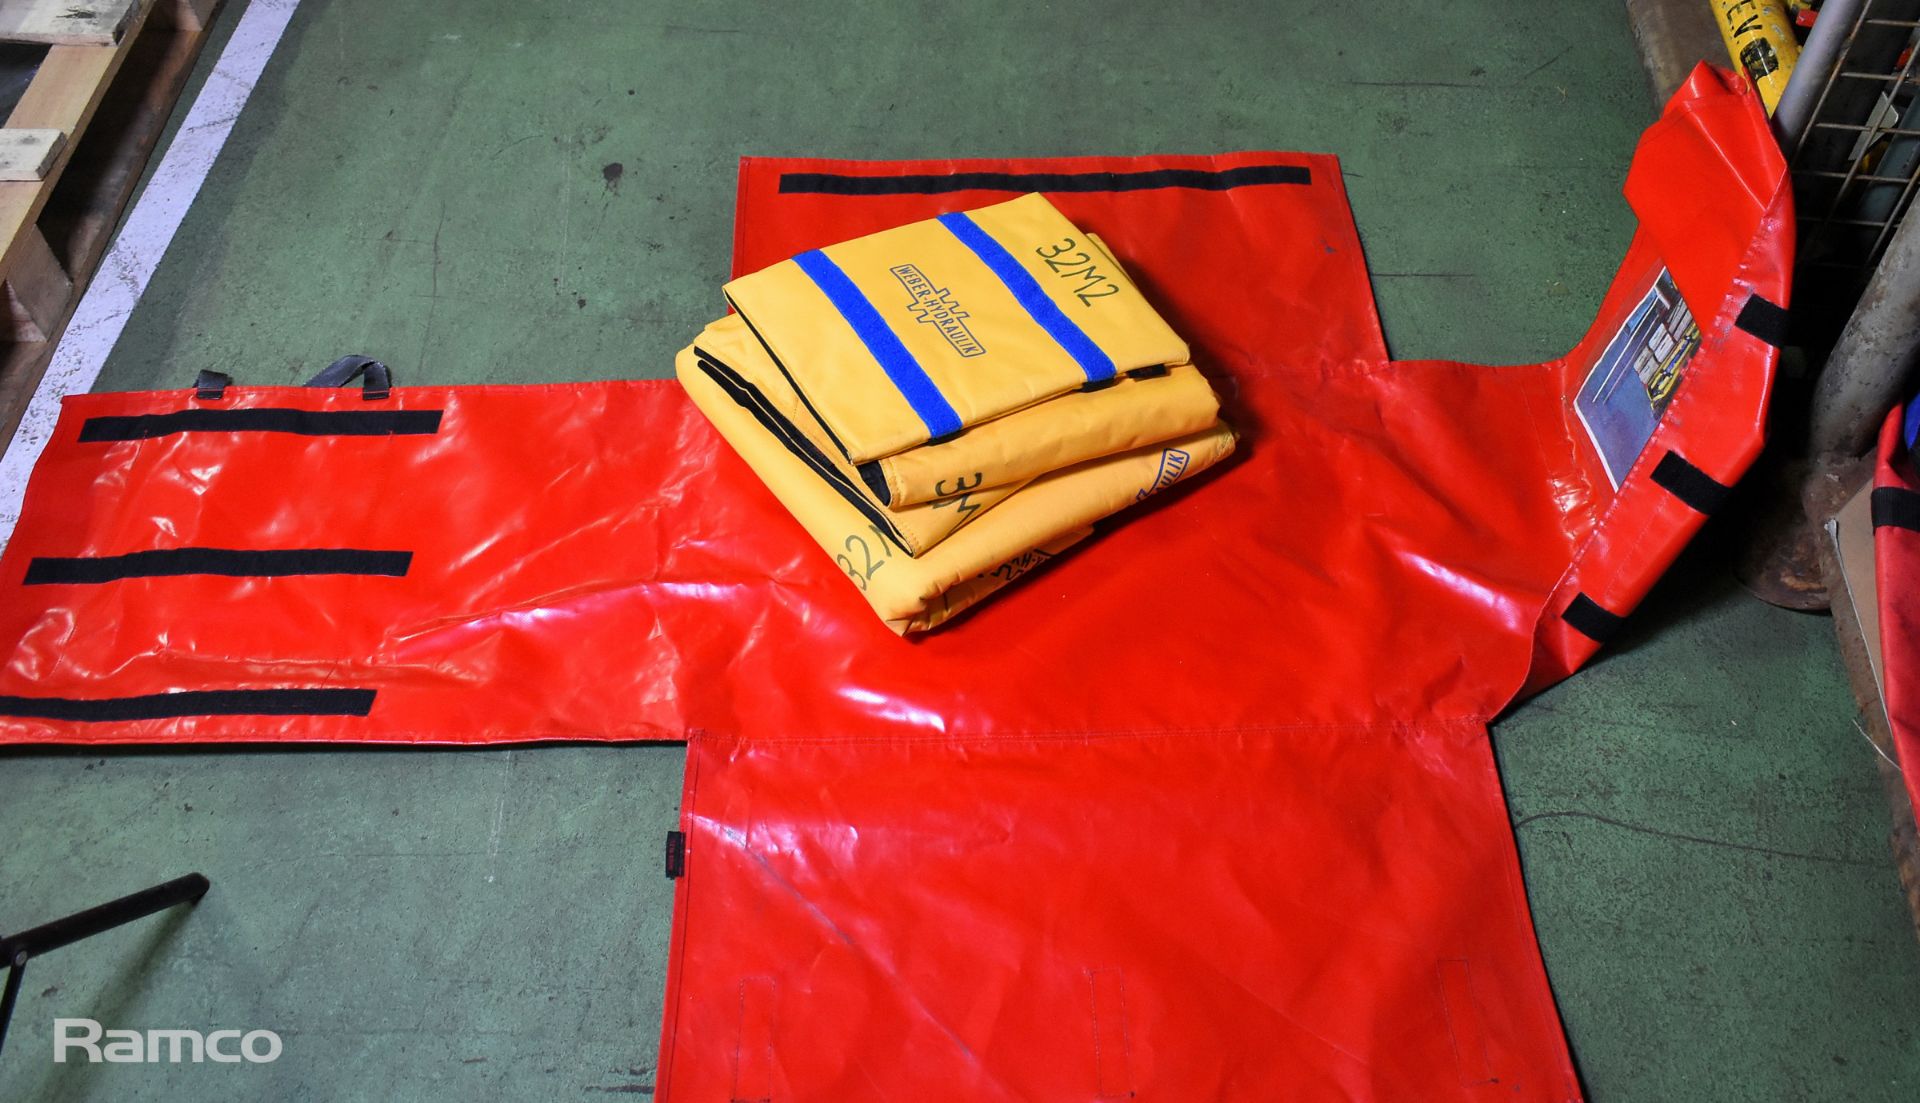 Fire and rescue accessories - hand tools, RTC chocks & blocks, ropes, lights, chemical sorbent pads - Image 7 of 13